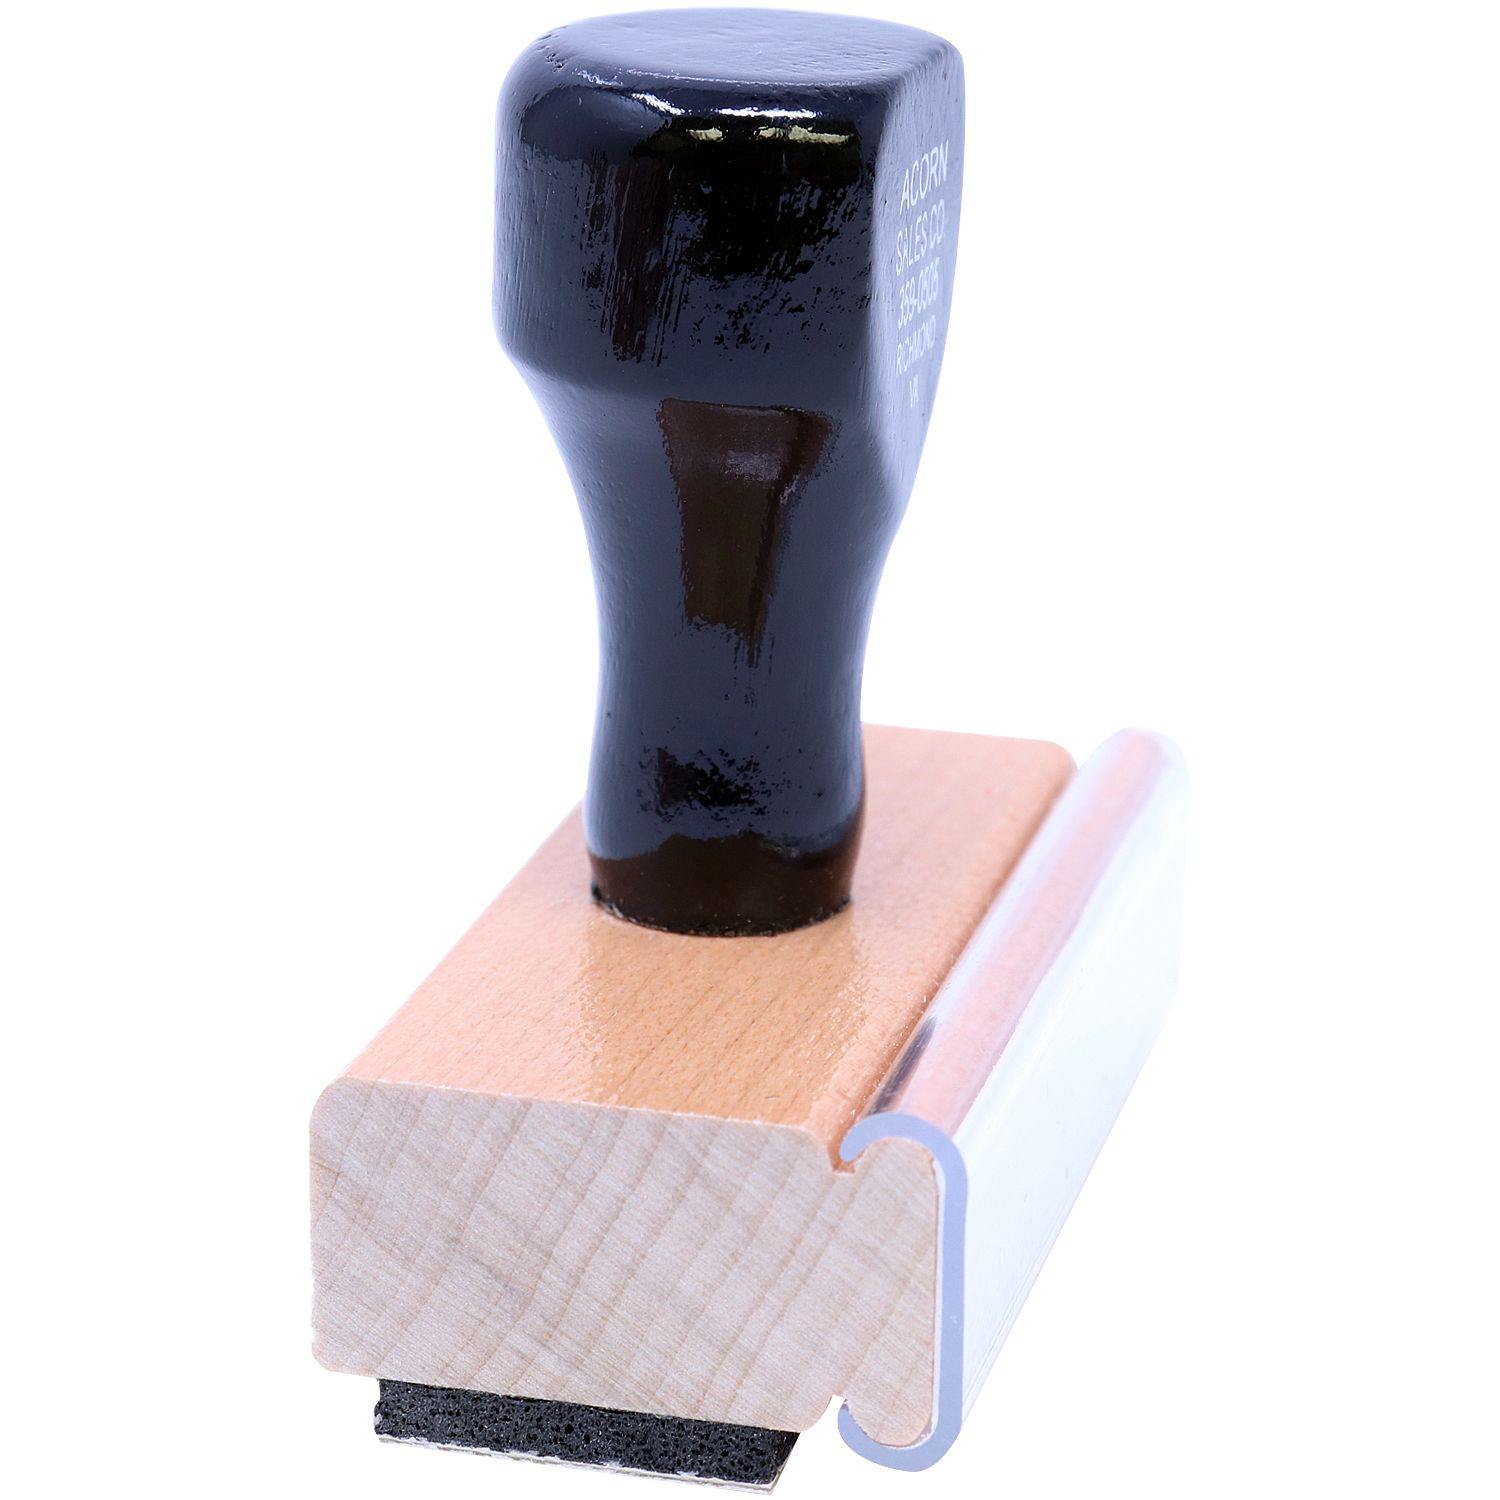 Personalized rubber stamp show your partner the quality of your